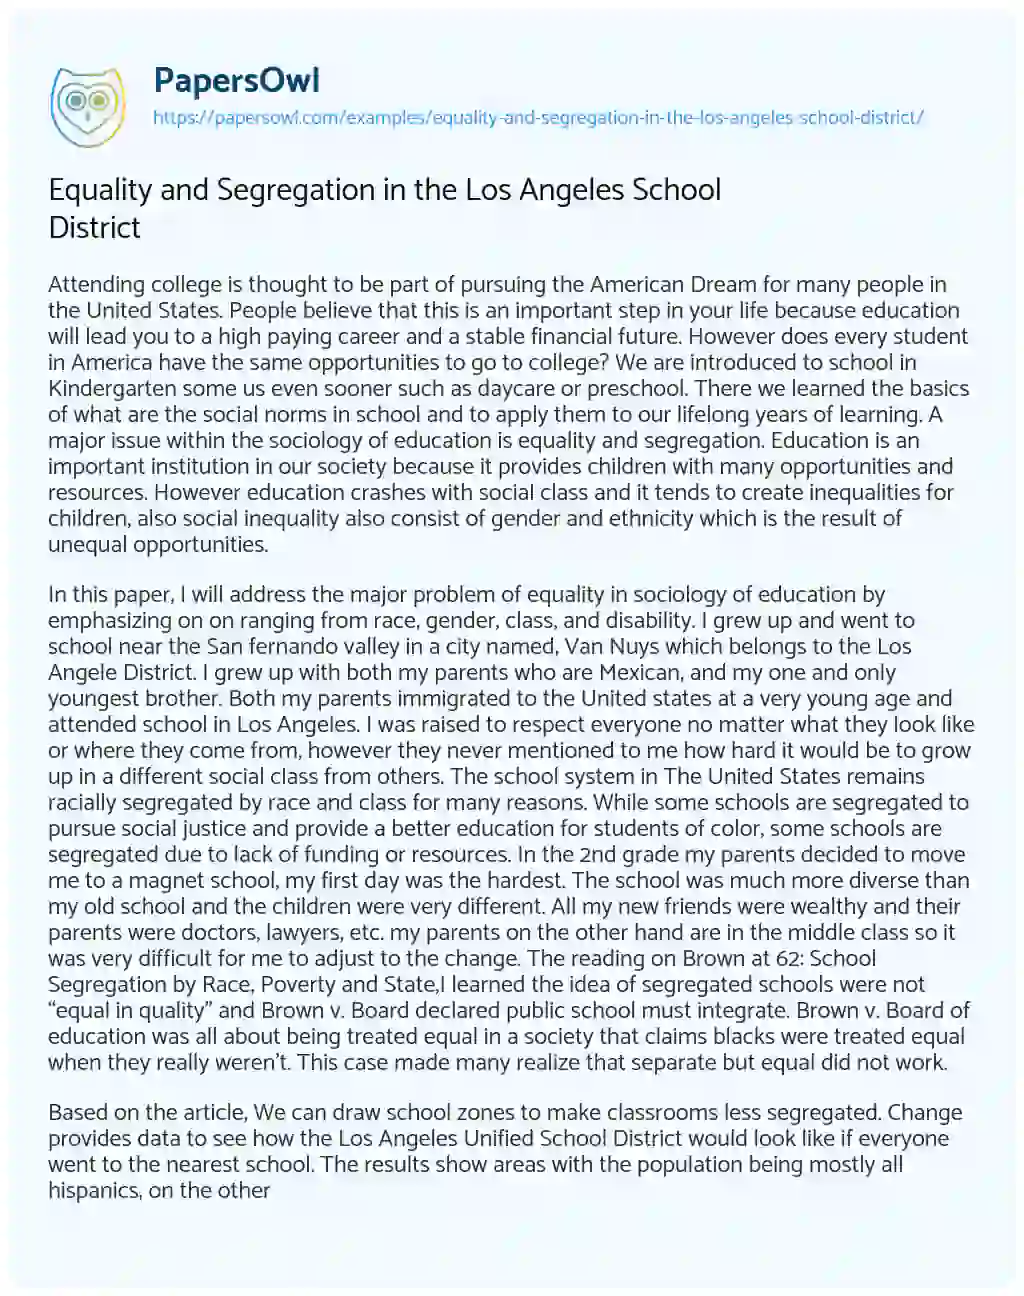 Essay on Equality and Segregation in the Los Angeles School District